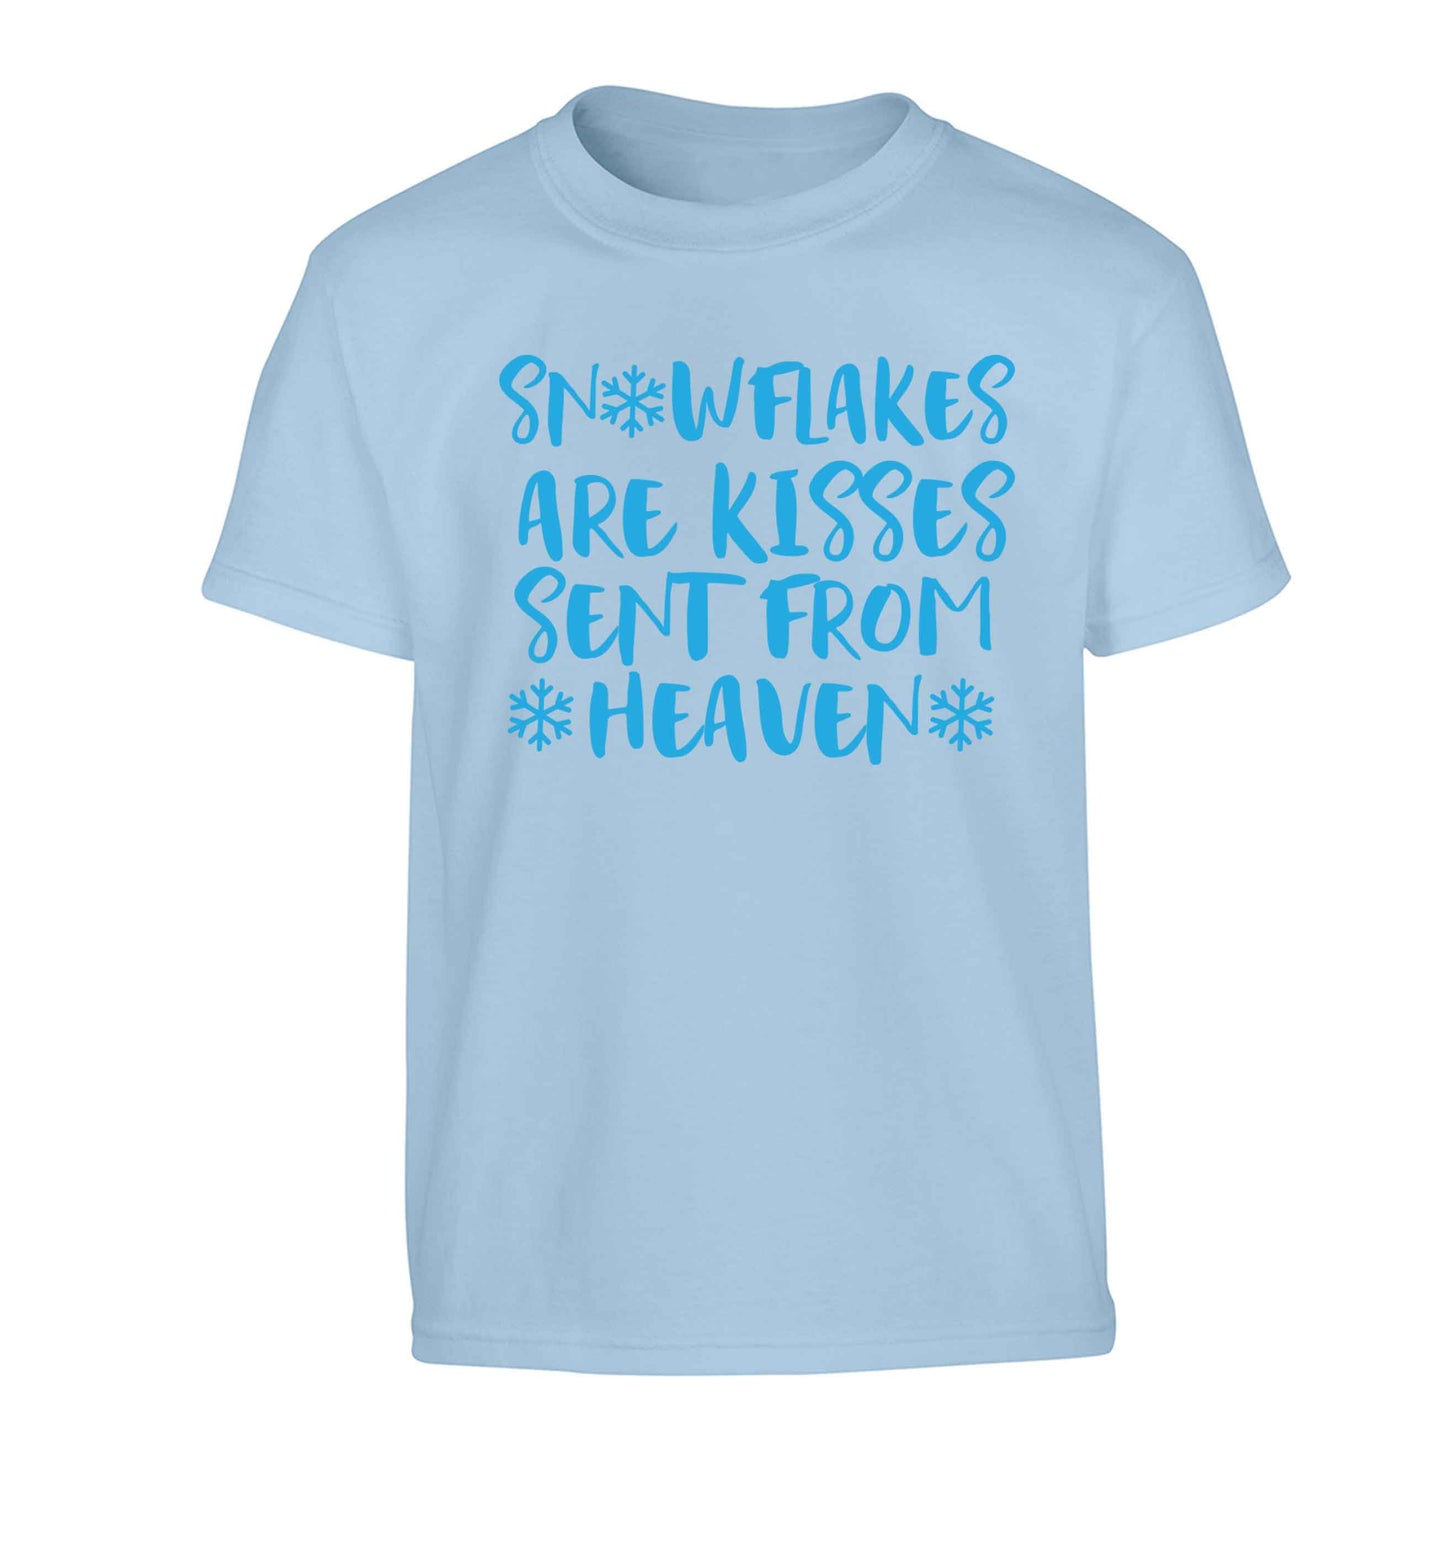 Snowflakes are kisses sent from heaven Children's light blue Tshirt 12-13 Years